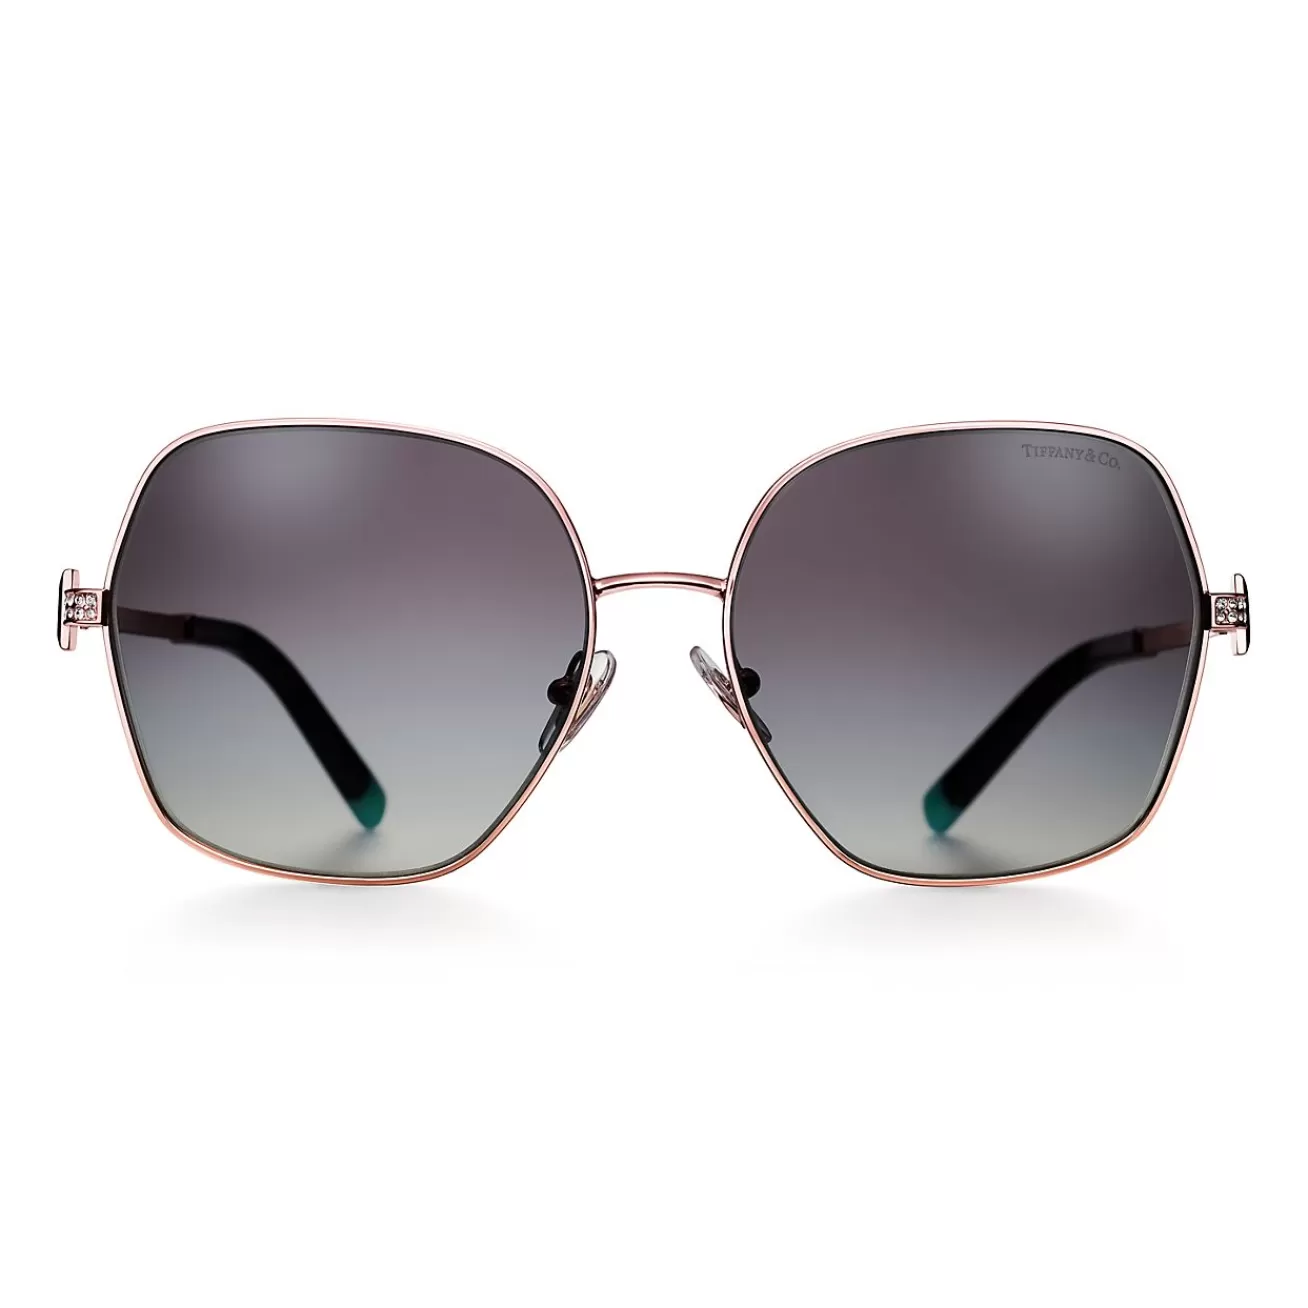 Tiffany & Co. Tiffany T Sunglasses in Pale Gold-colored Metal with Gradient Gray Lenses | ^ Tiffany T | Sunglasses